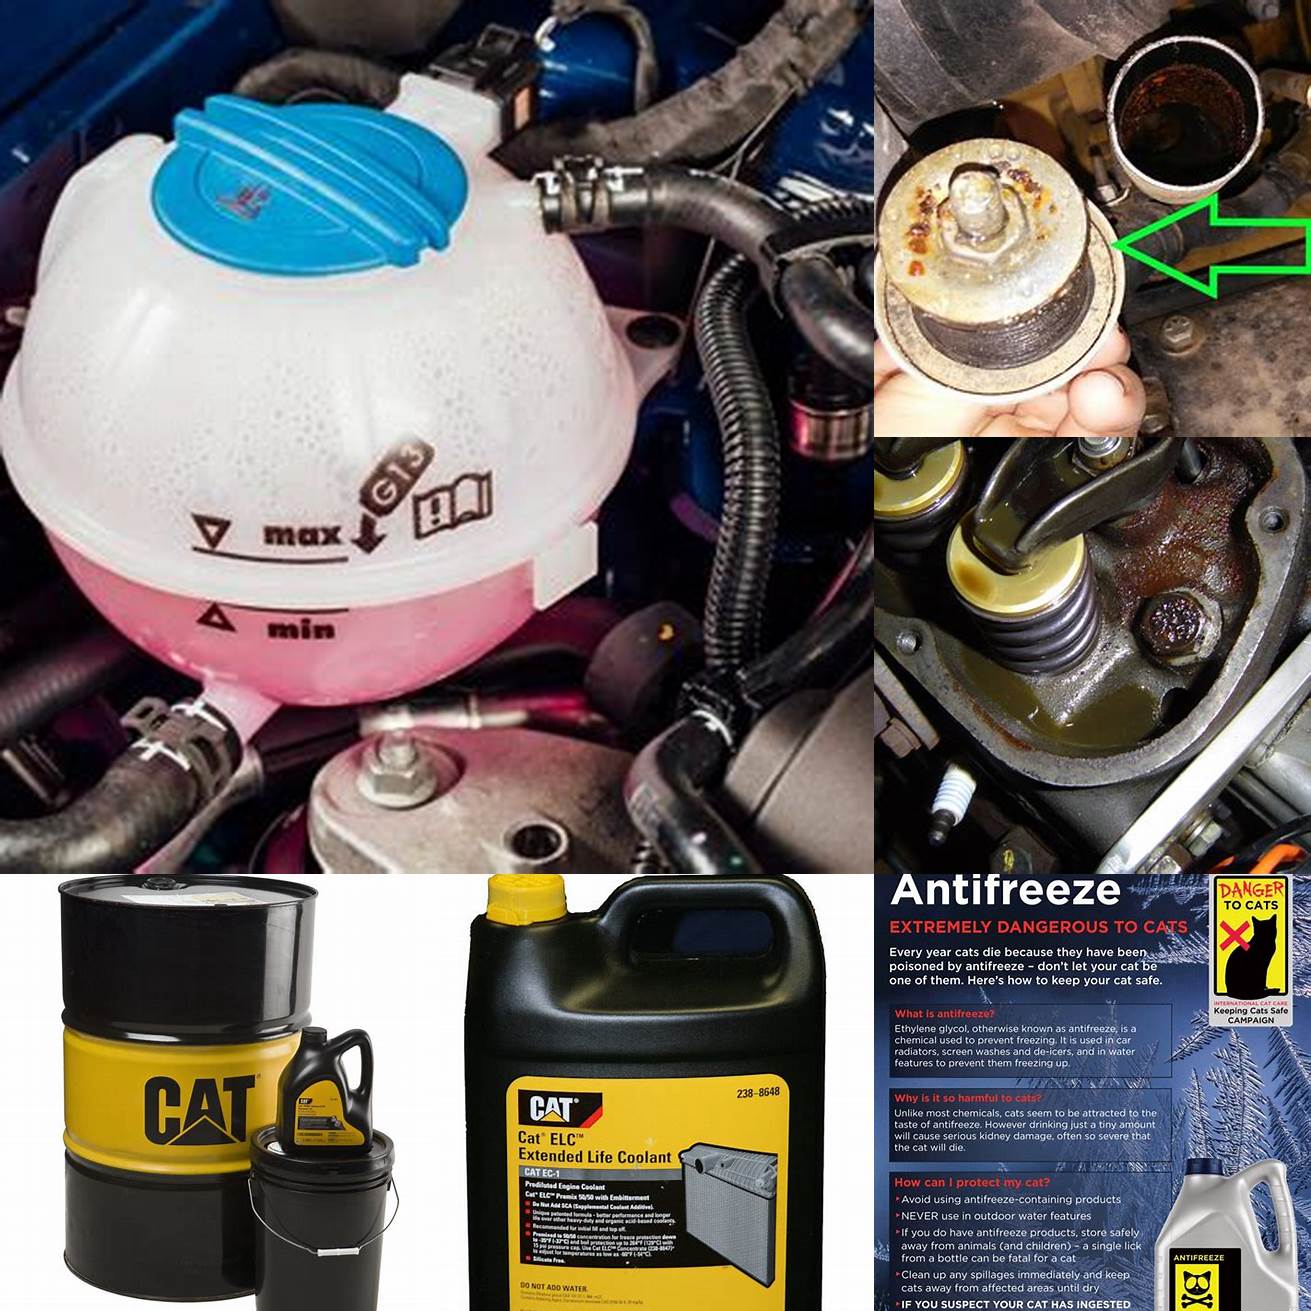 Loss of coolant or oil